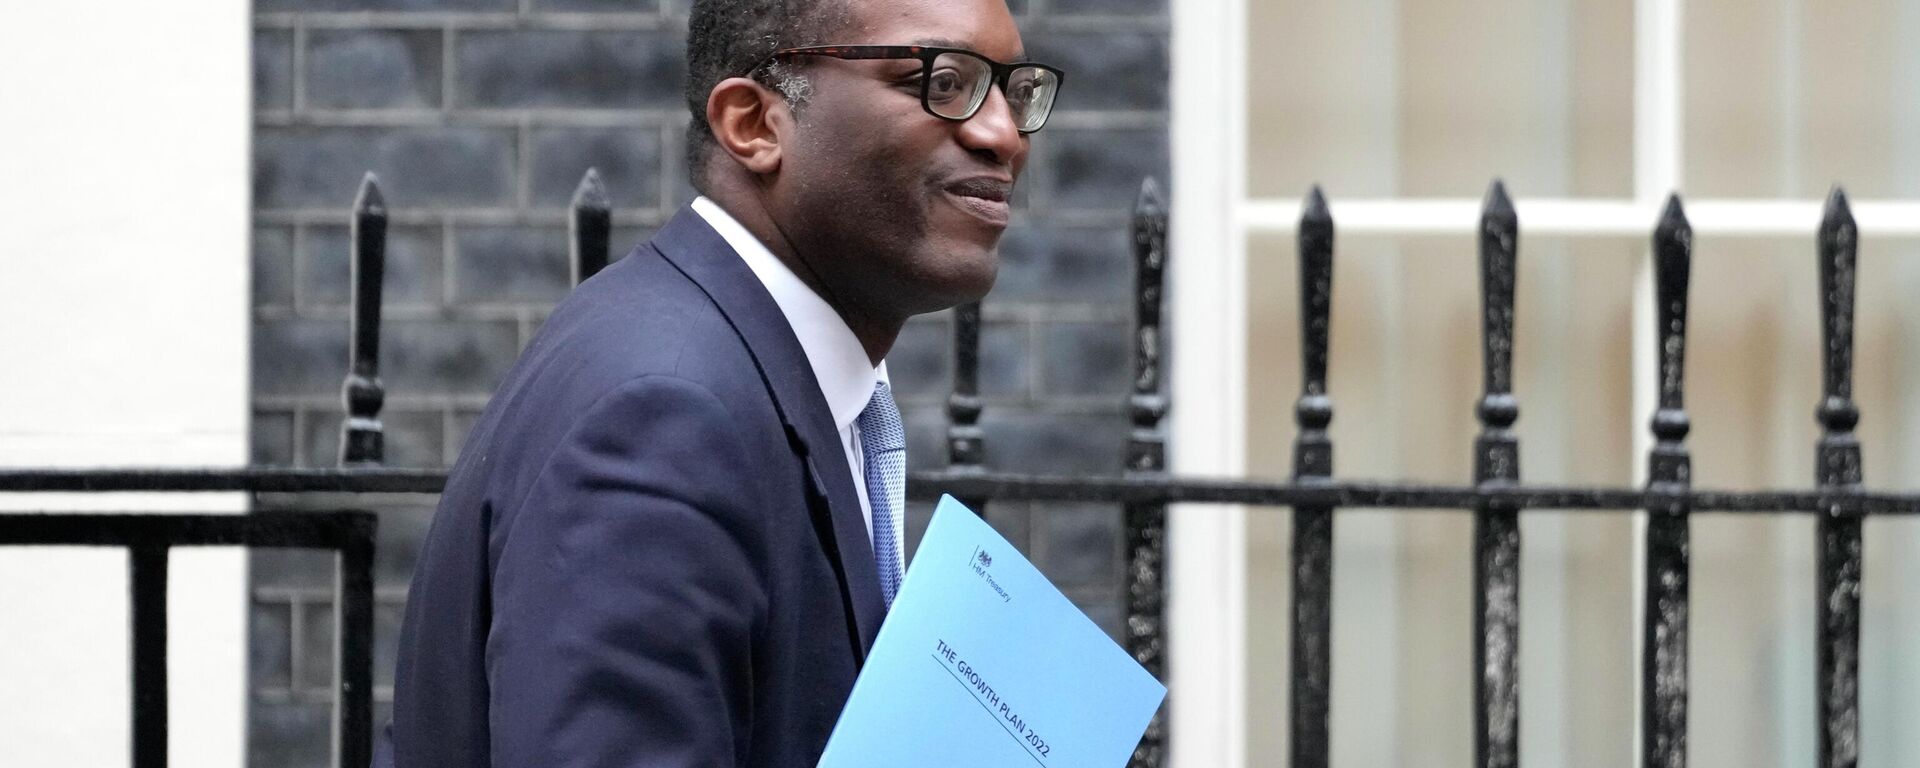 Britain's Chancellor Kwasi Kwarteng leaves 11 Downing Street in London, Friday, Sept. 23, 2022. The Chancellor will deliver a mini budget in parliament. - Sputnik International, 1920, 03.10.2022